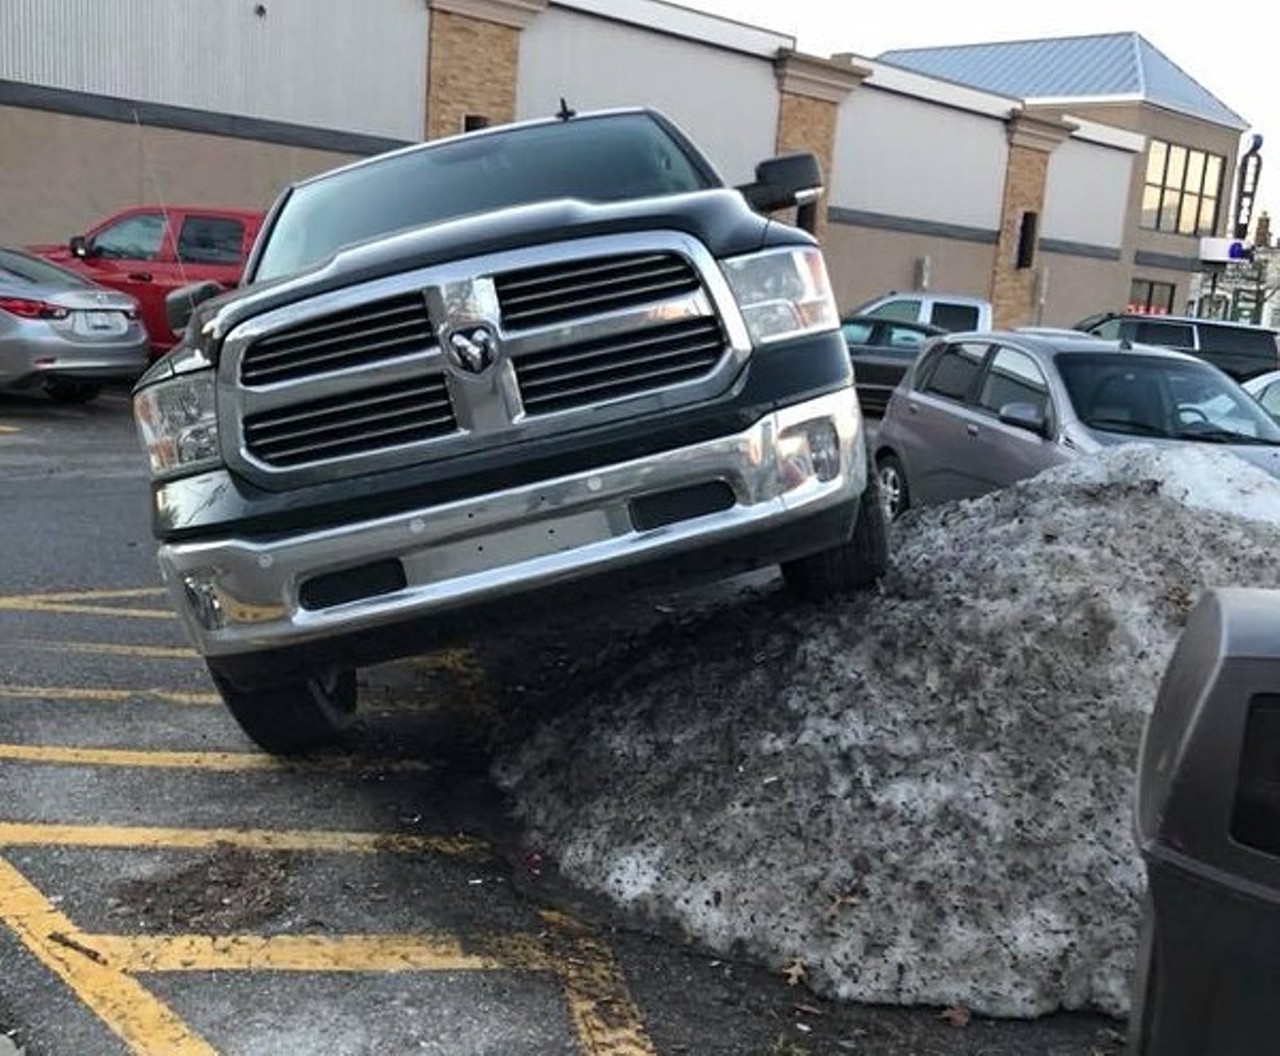  Parking spaces become snow banks  
The plow trucks have to pile the snow somewhere, giving us less parking spaces but more mounds of snow. If we need to climb the highest mountain of snow to park, then so be it. 
MT file photo 